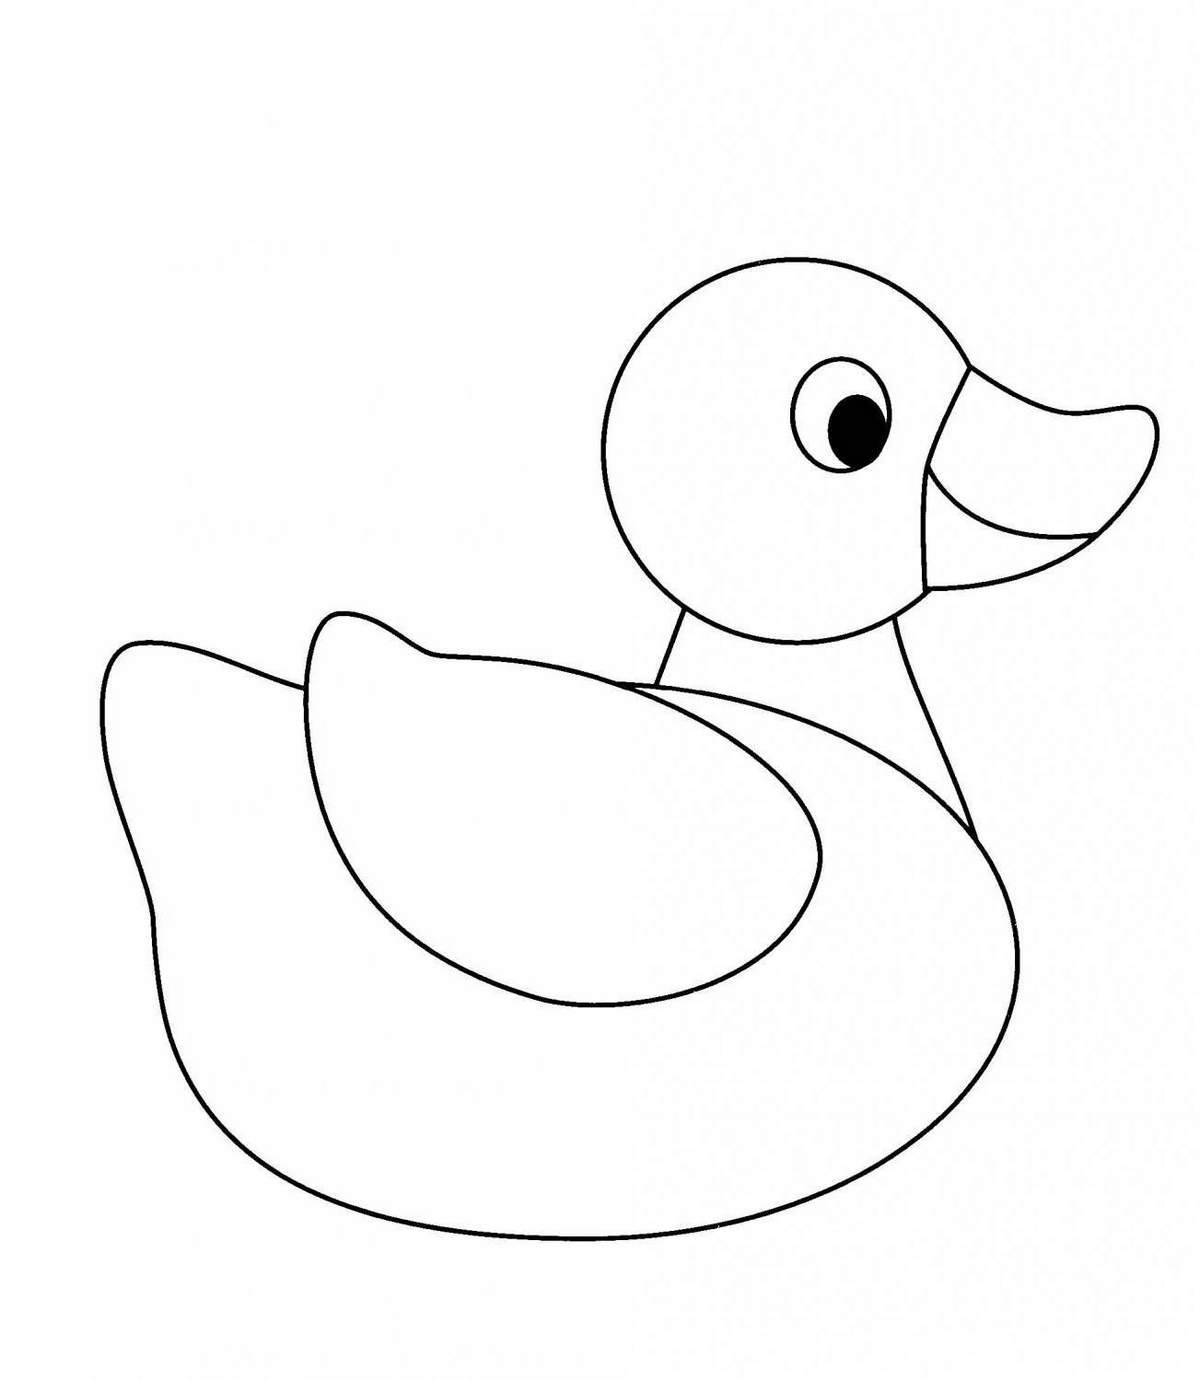 Exquisite duck lalaphan coloring pages for kids